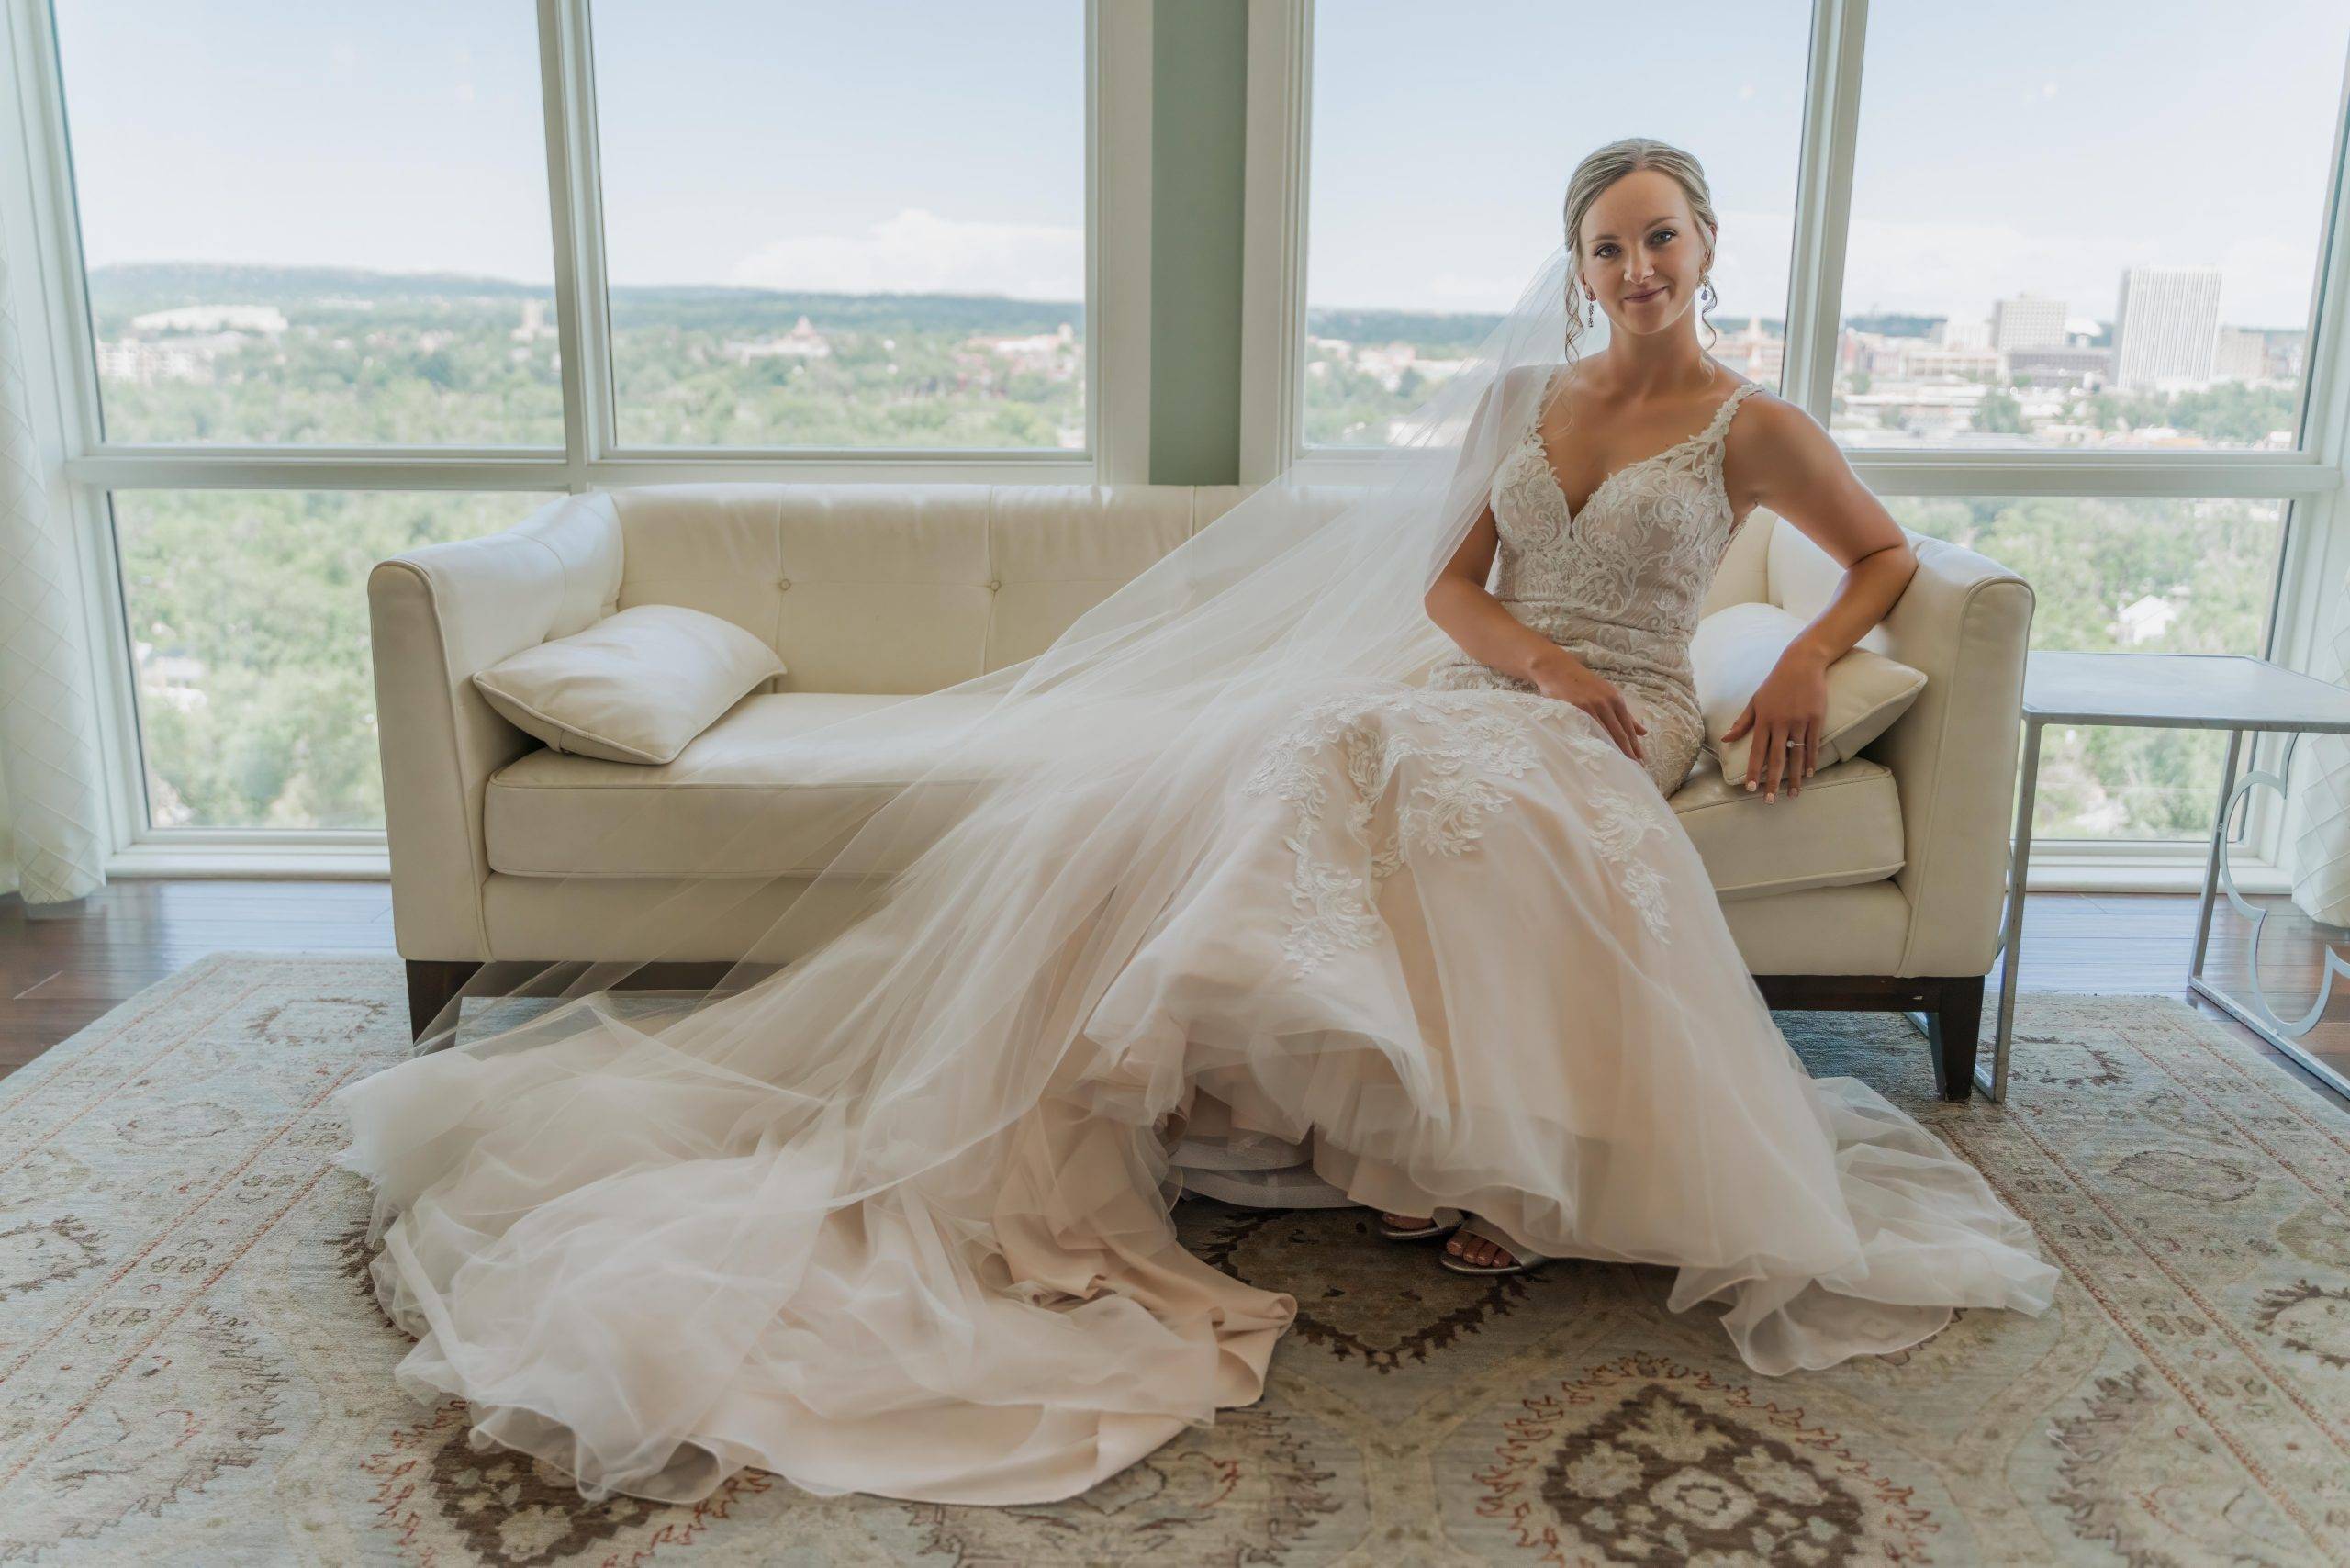 A bride sitting in her wedding dress on a white couch in Colorado Springs, Colorado